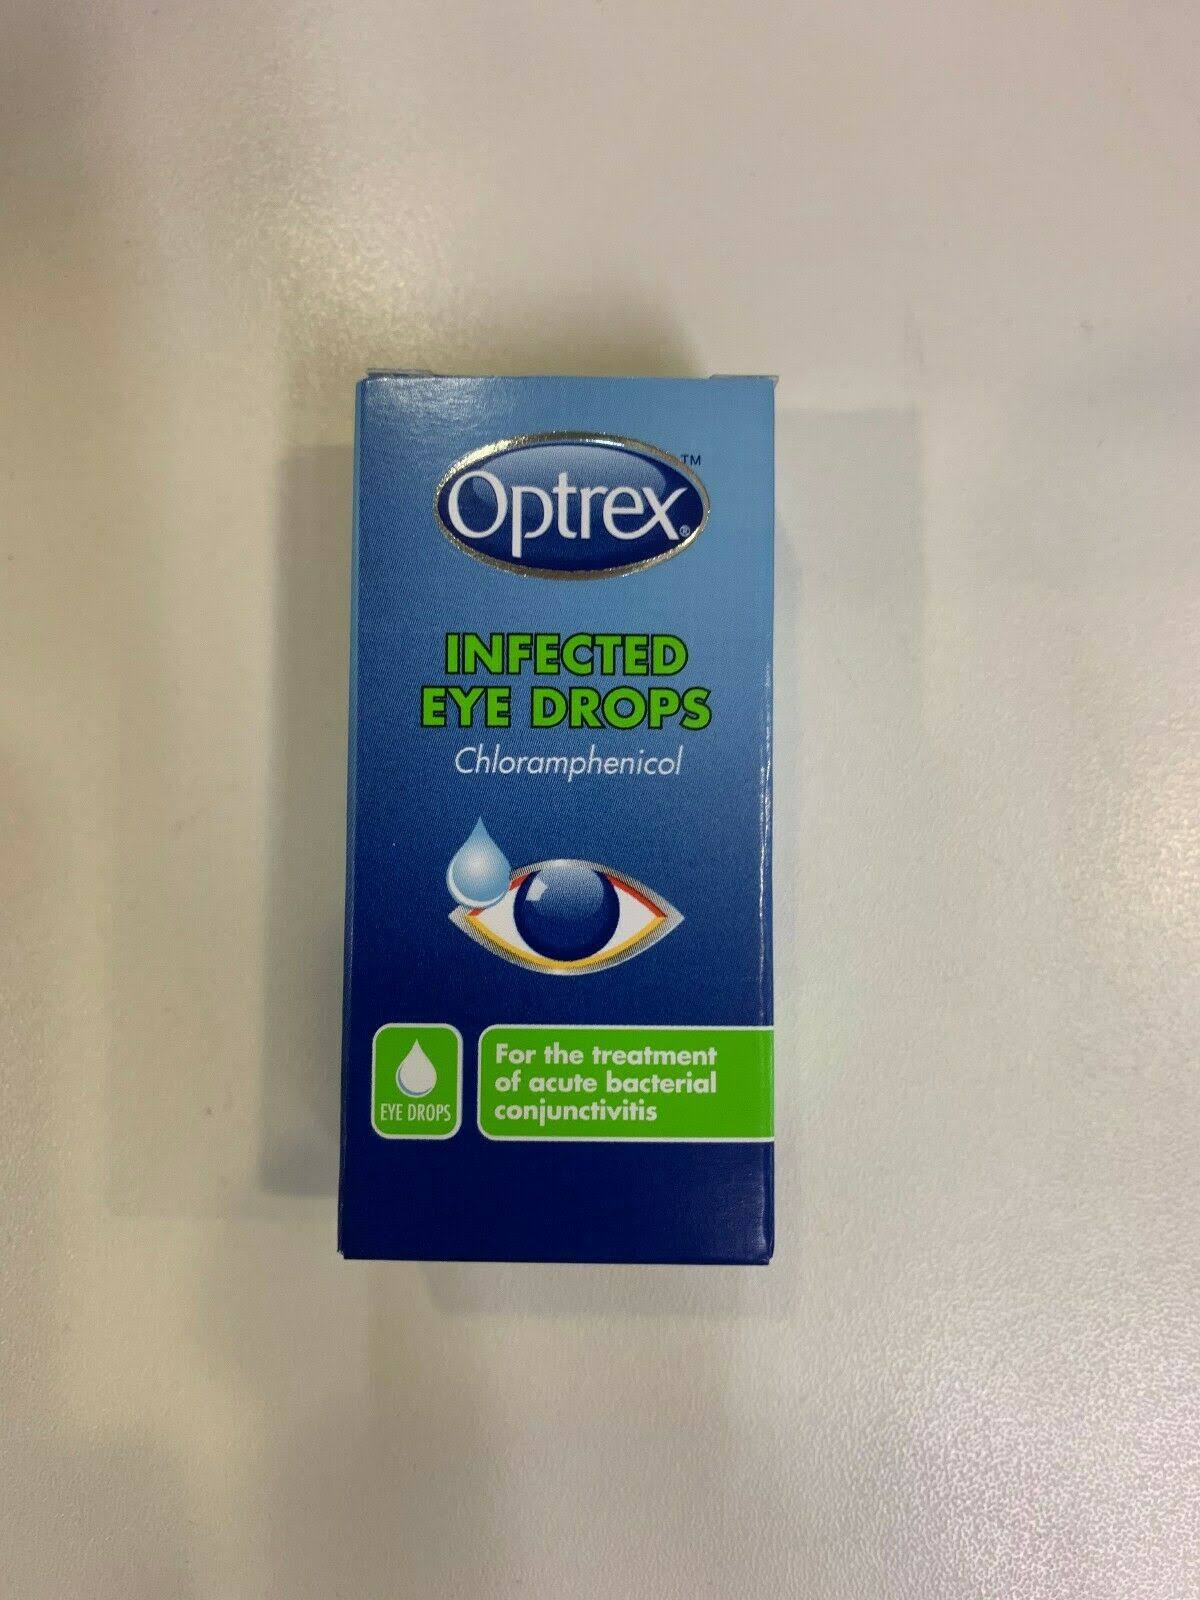 Optrex Infected Eye Drops 10ml